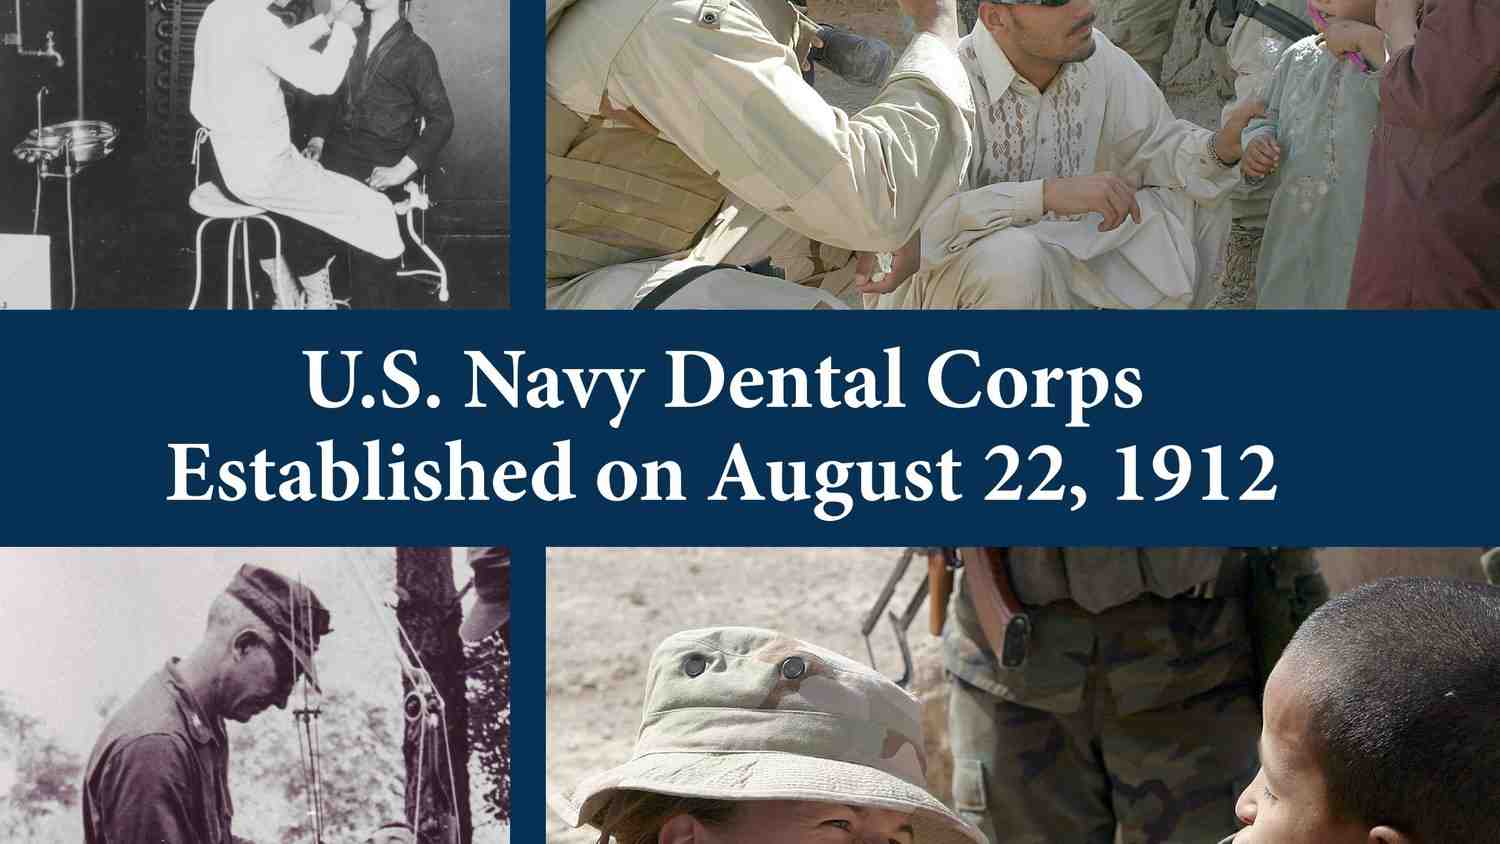 What rank is a Navy dentist?